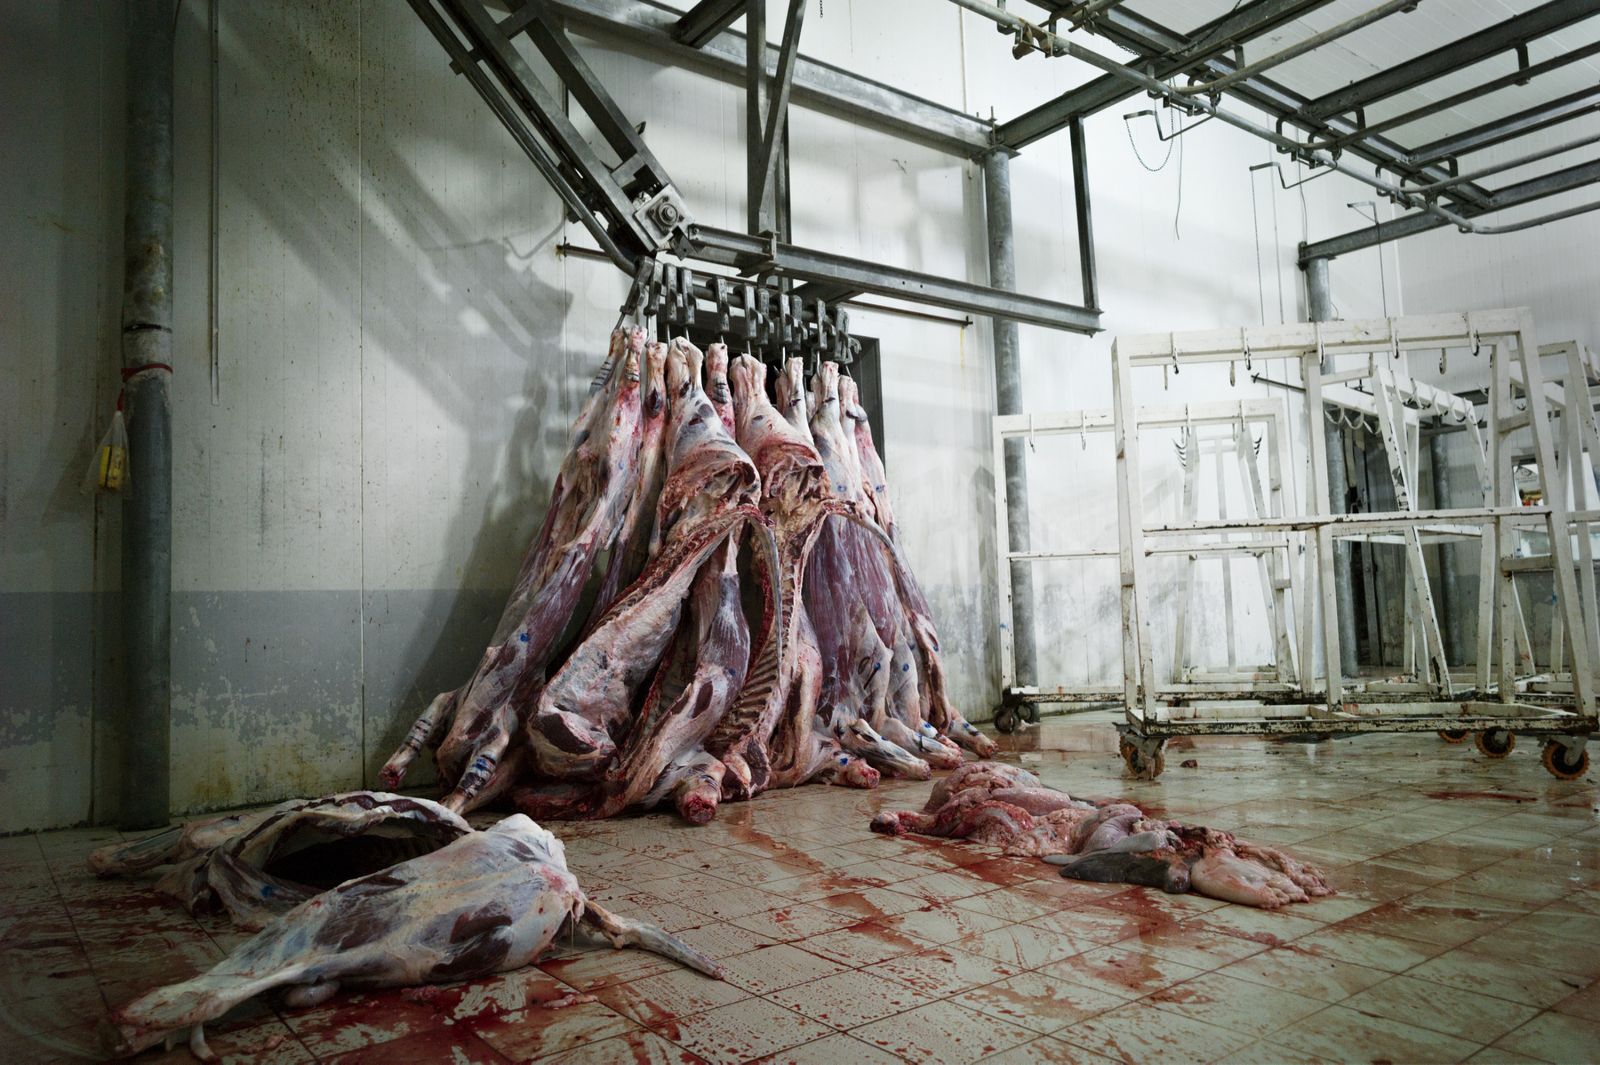 © Simon Chang - Image from the Shepherds and the slaughterhouse photography project